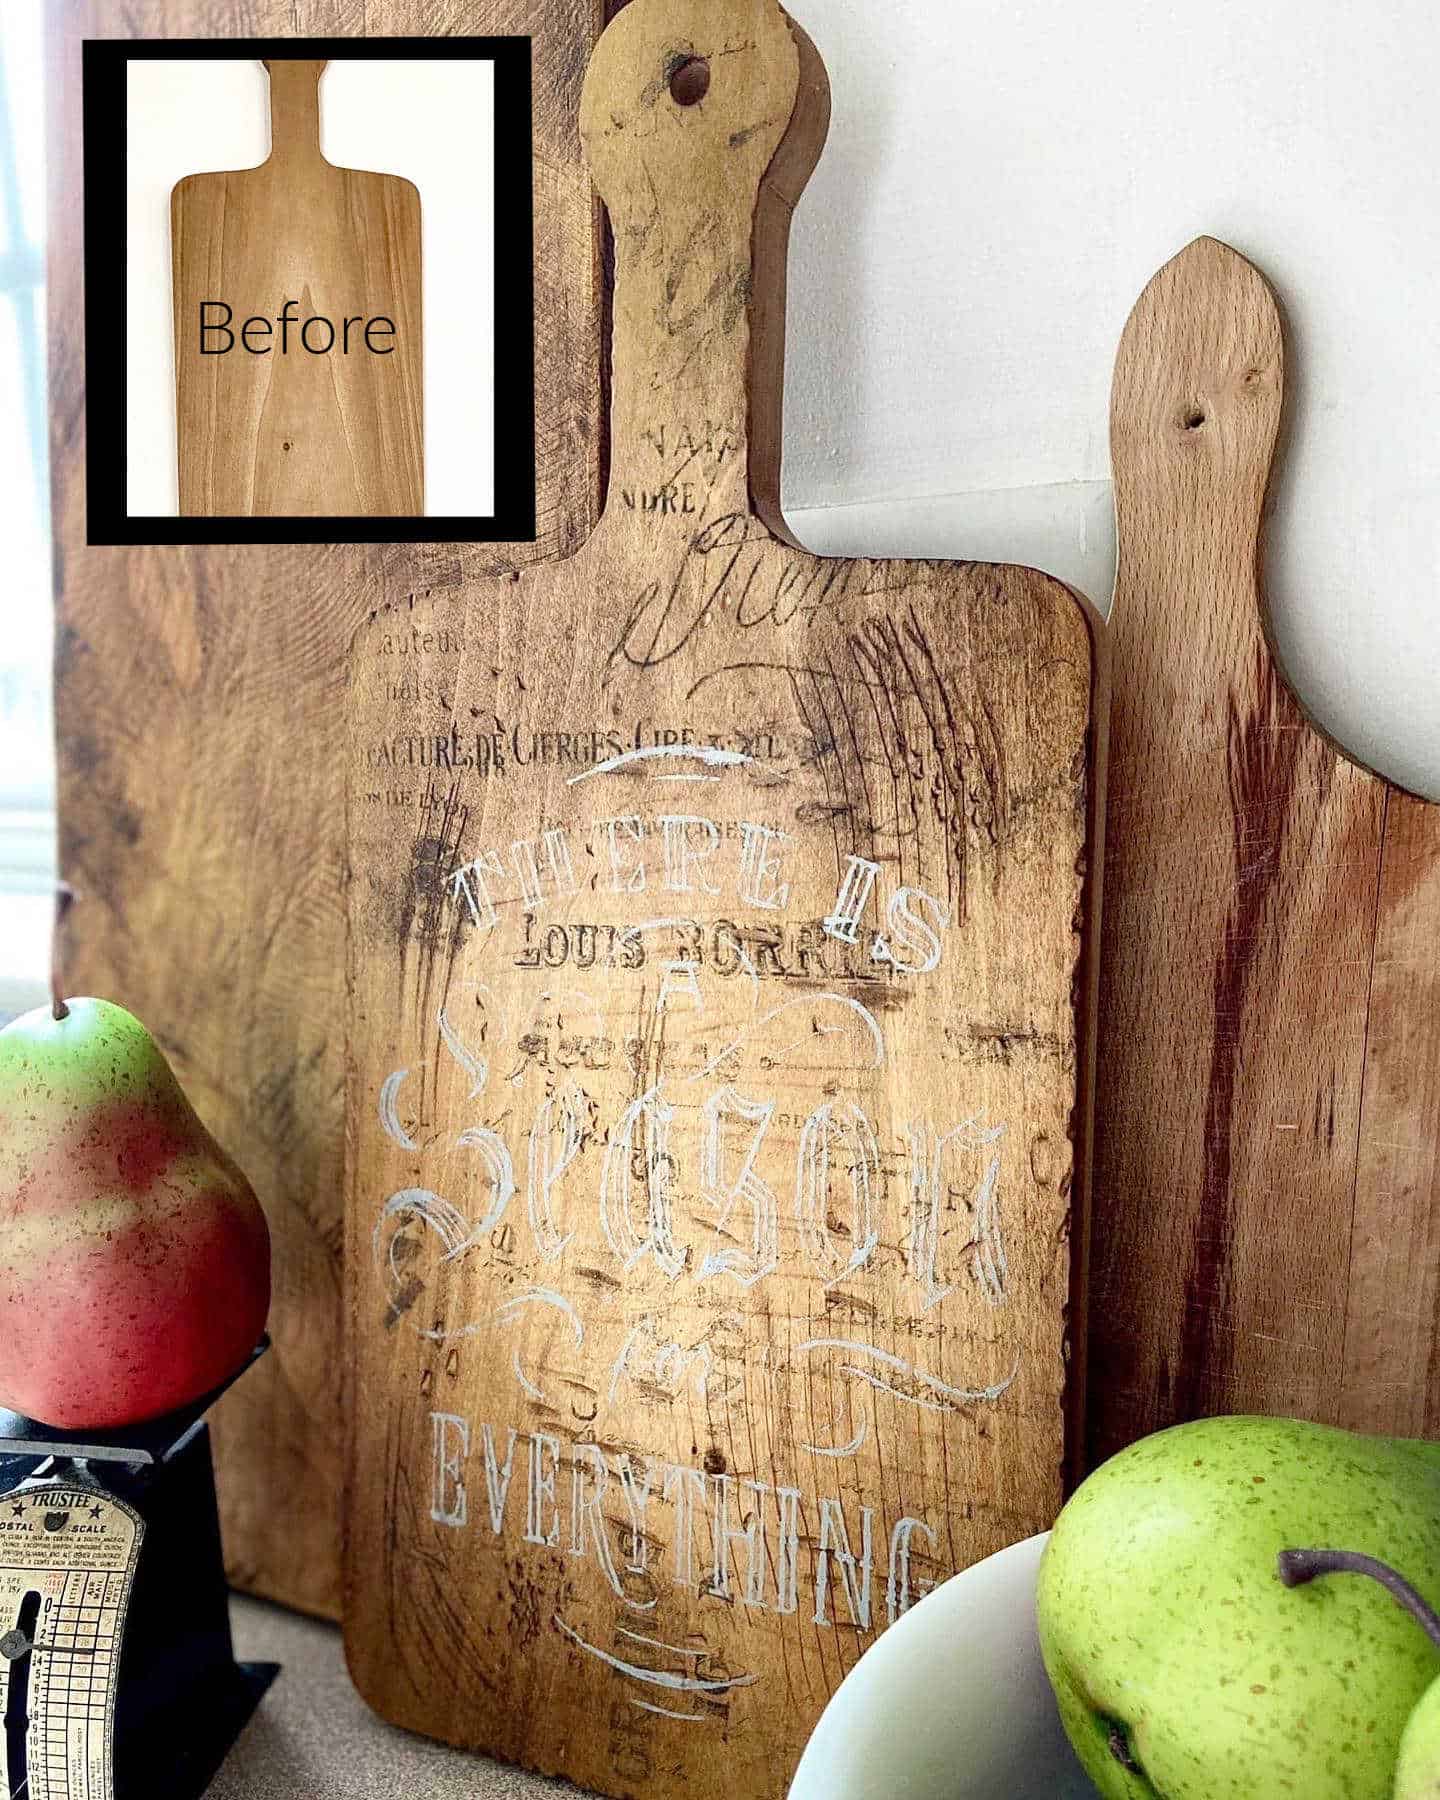 https://www.snazzylittlethings.com/wp-content/uploads/DIY-Kitchen-Decor-Cutting-Board-Before-and-After.jpg